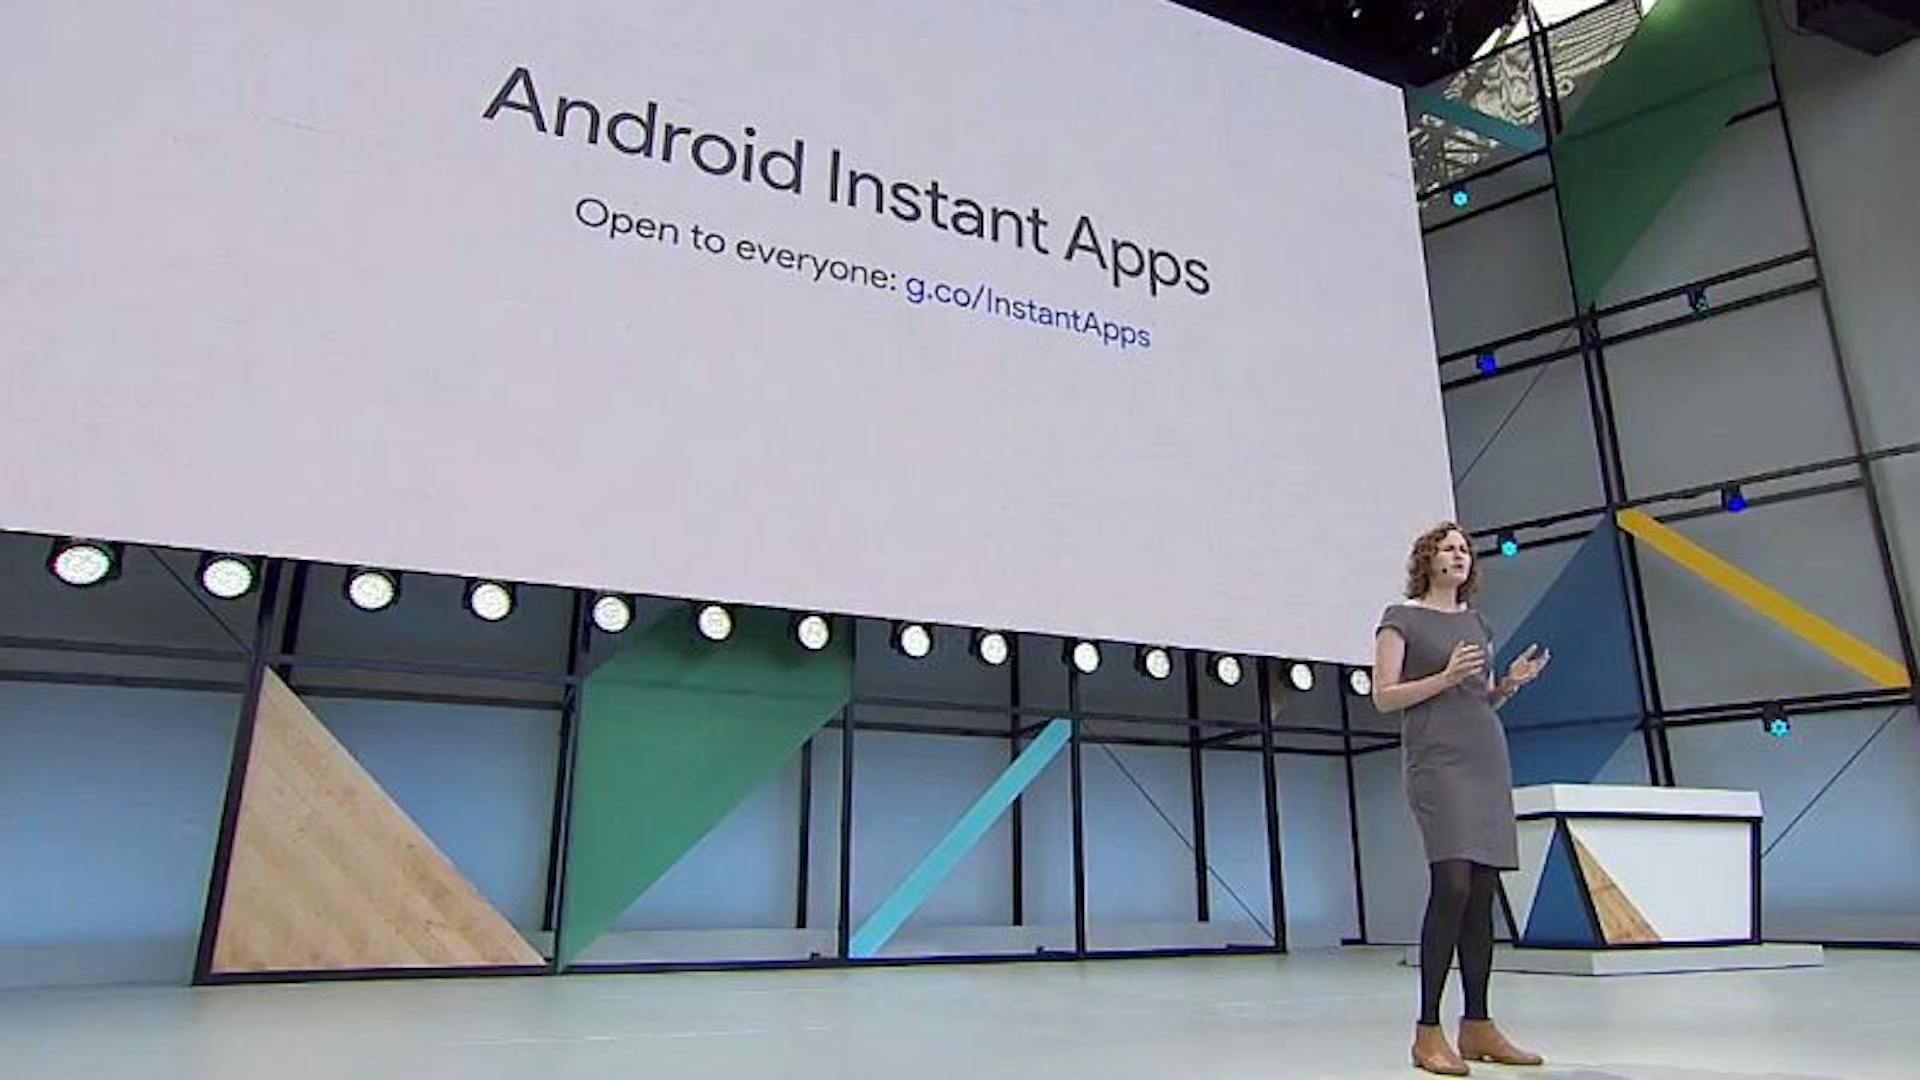 featured image - Android Instant Apps,All you need to know about..